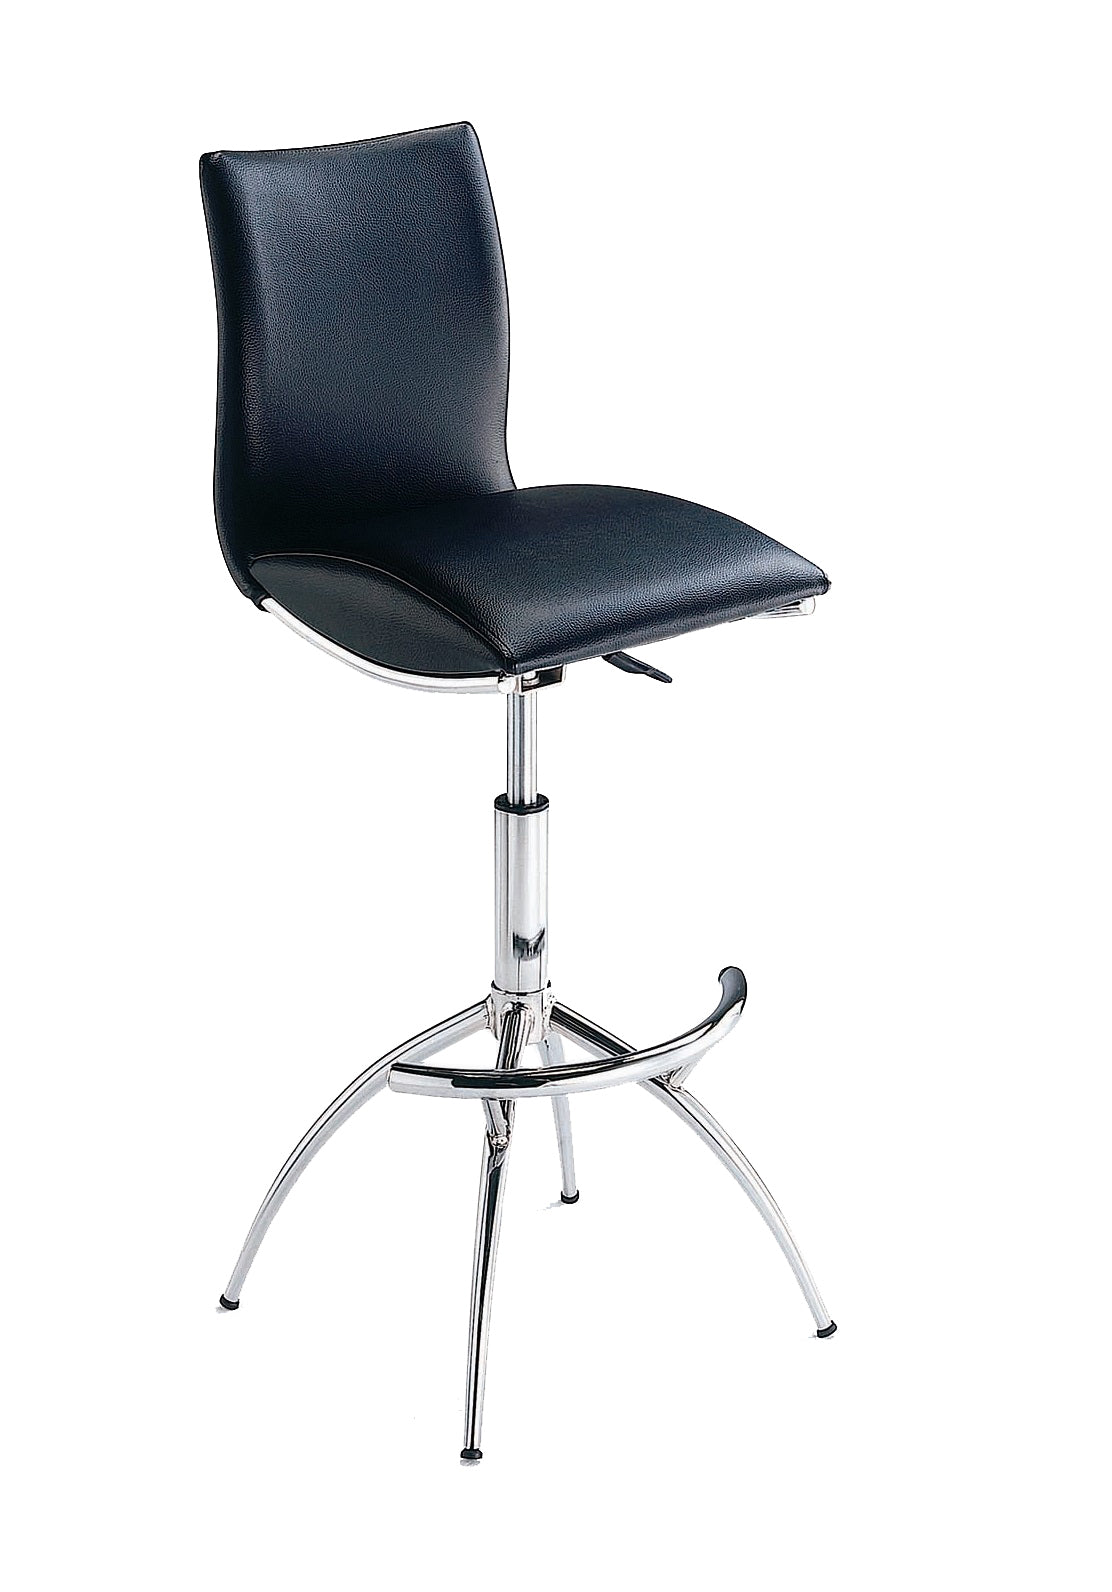 1st Choice Elevate Your Kitchen with Our Adjustable Chrome Bar Stool